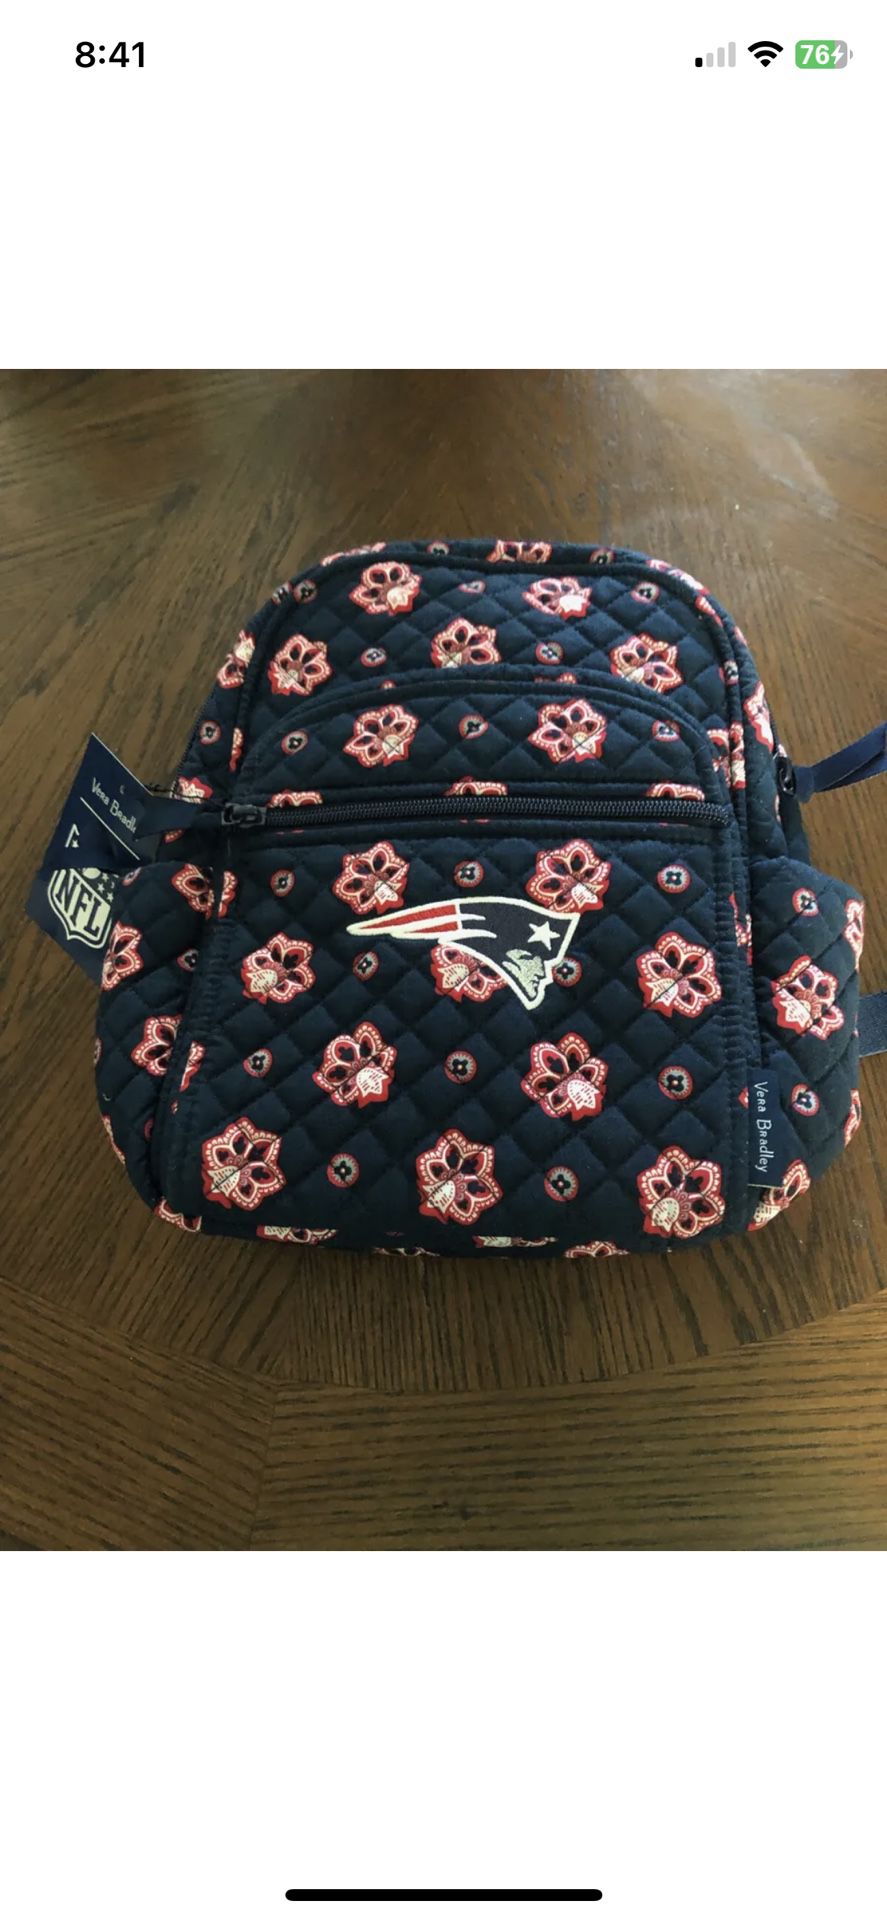 Vera Bradley NFL New England Patriots small backpack NWT Limited edition